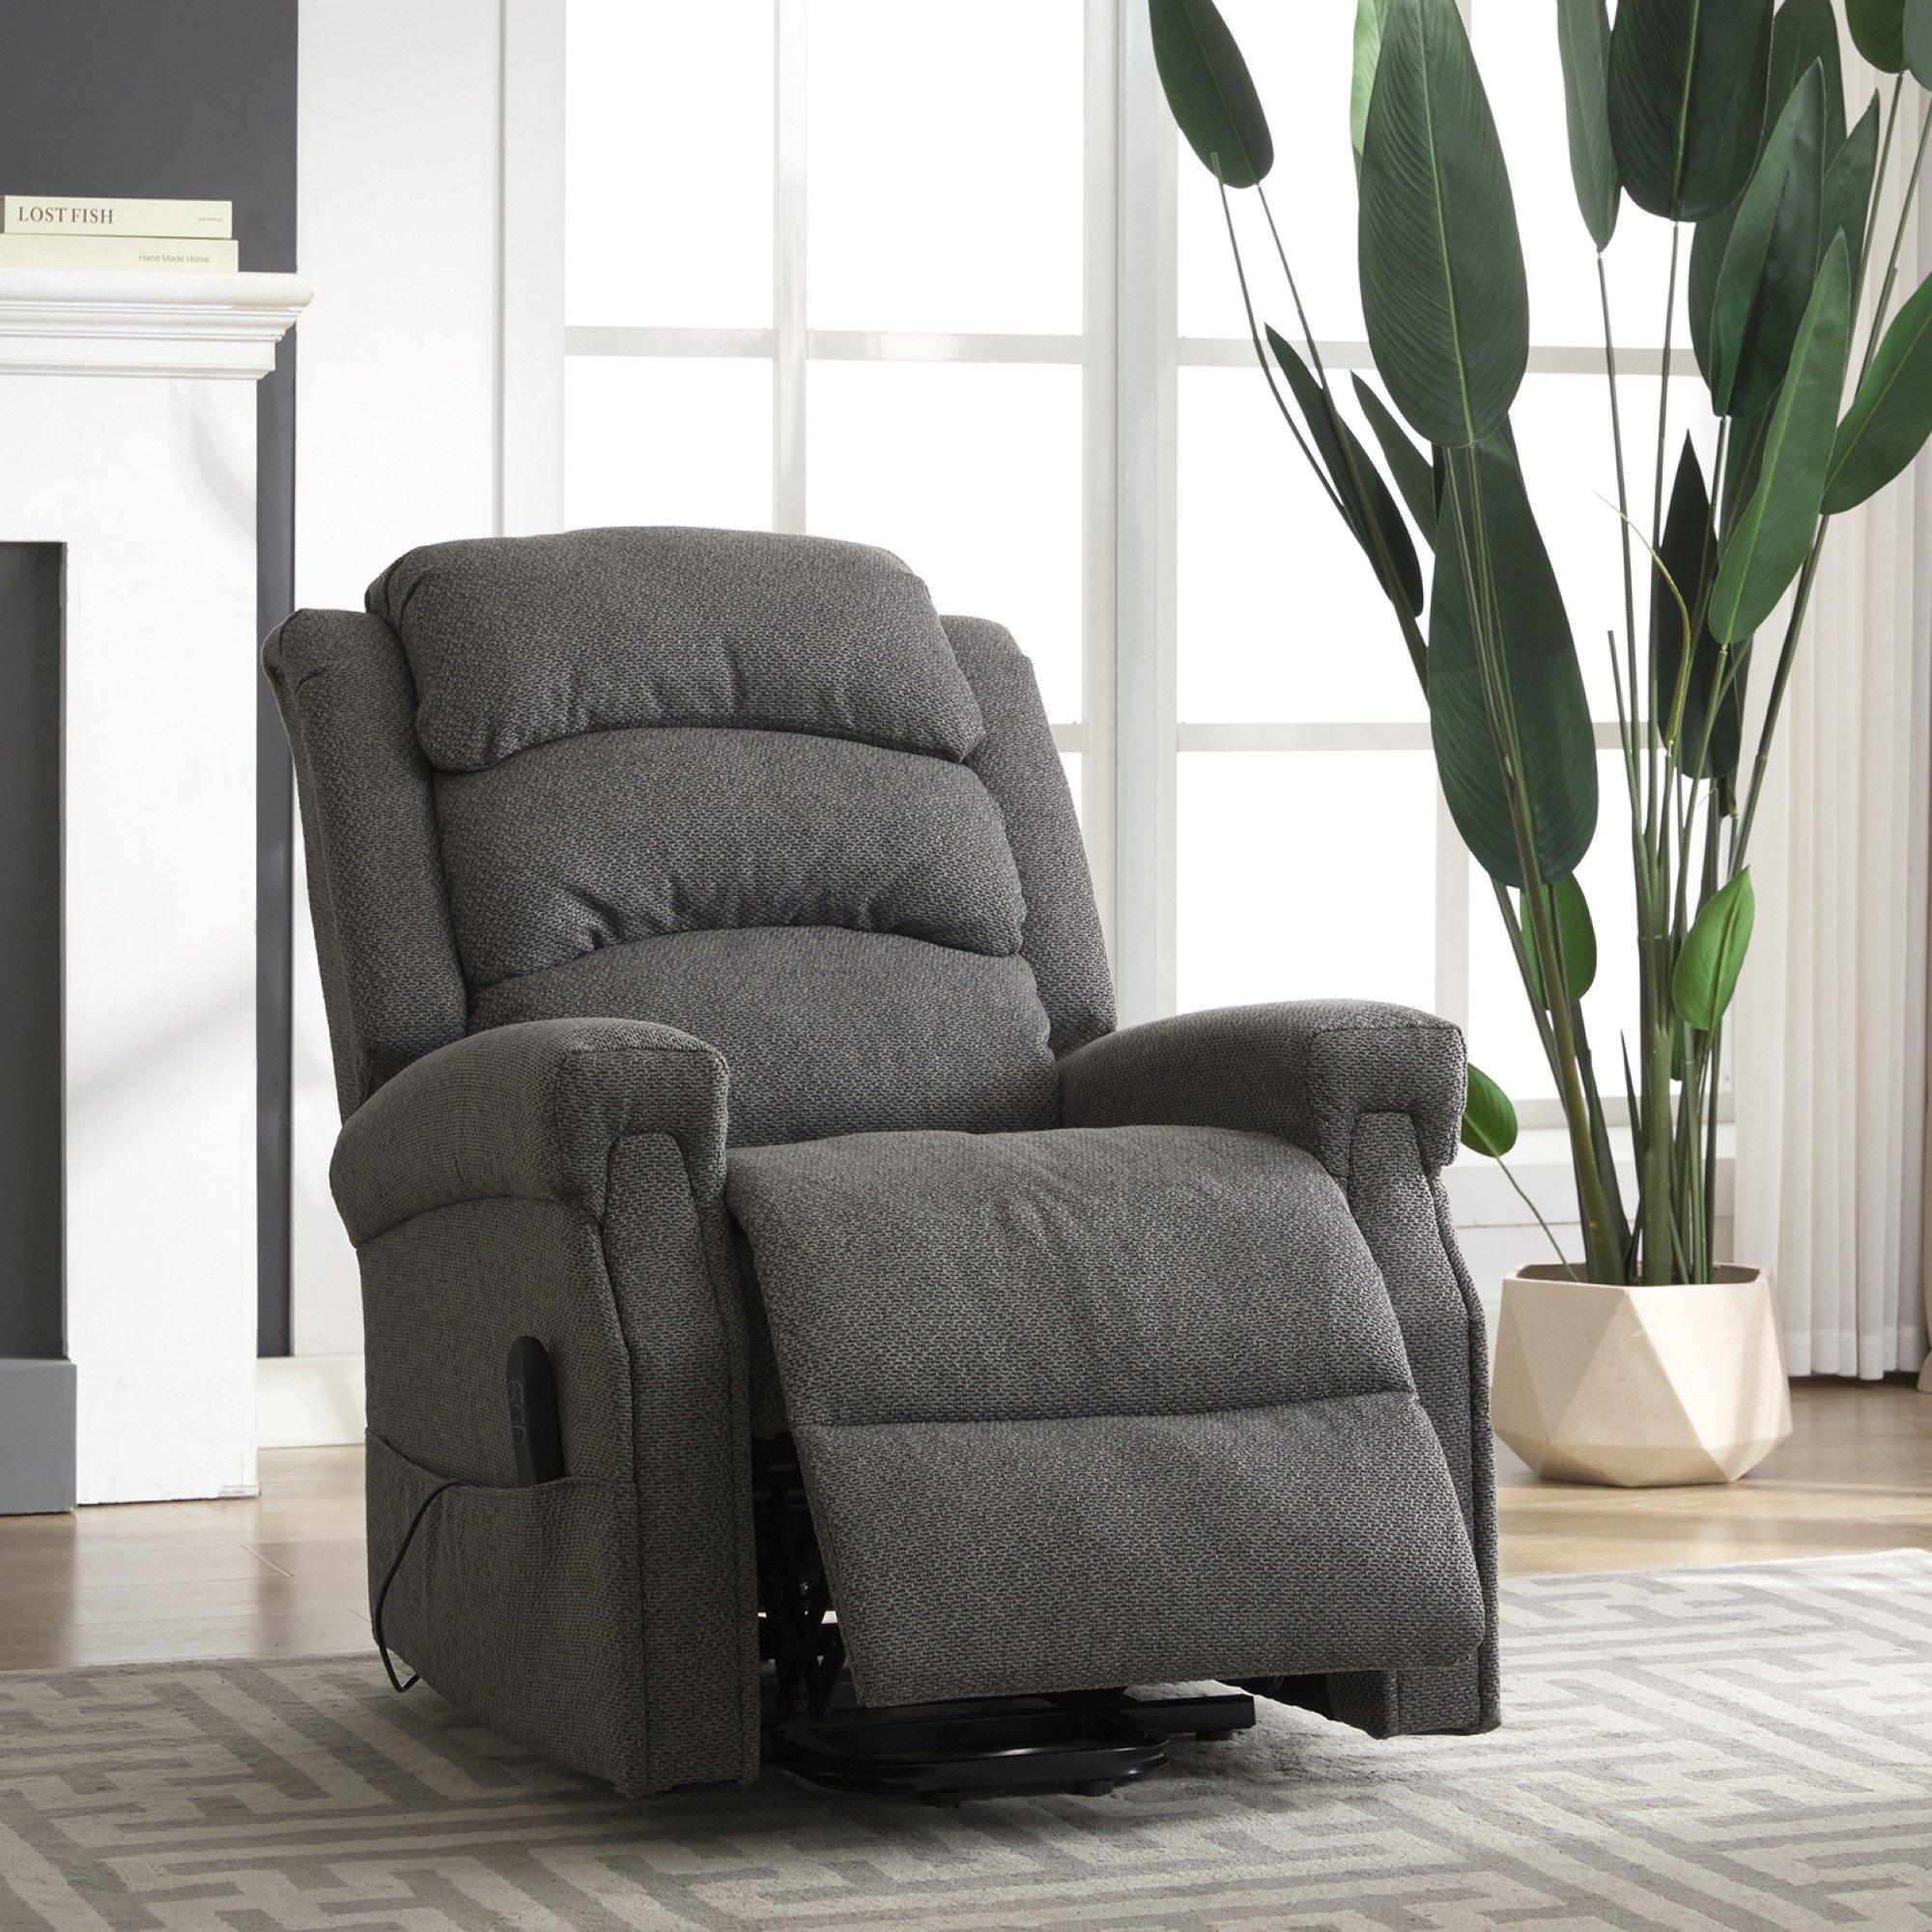 Eltham Dual Motor Electric Lift Assist Recliner with Massage and Heat